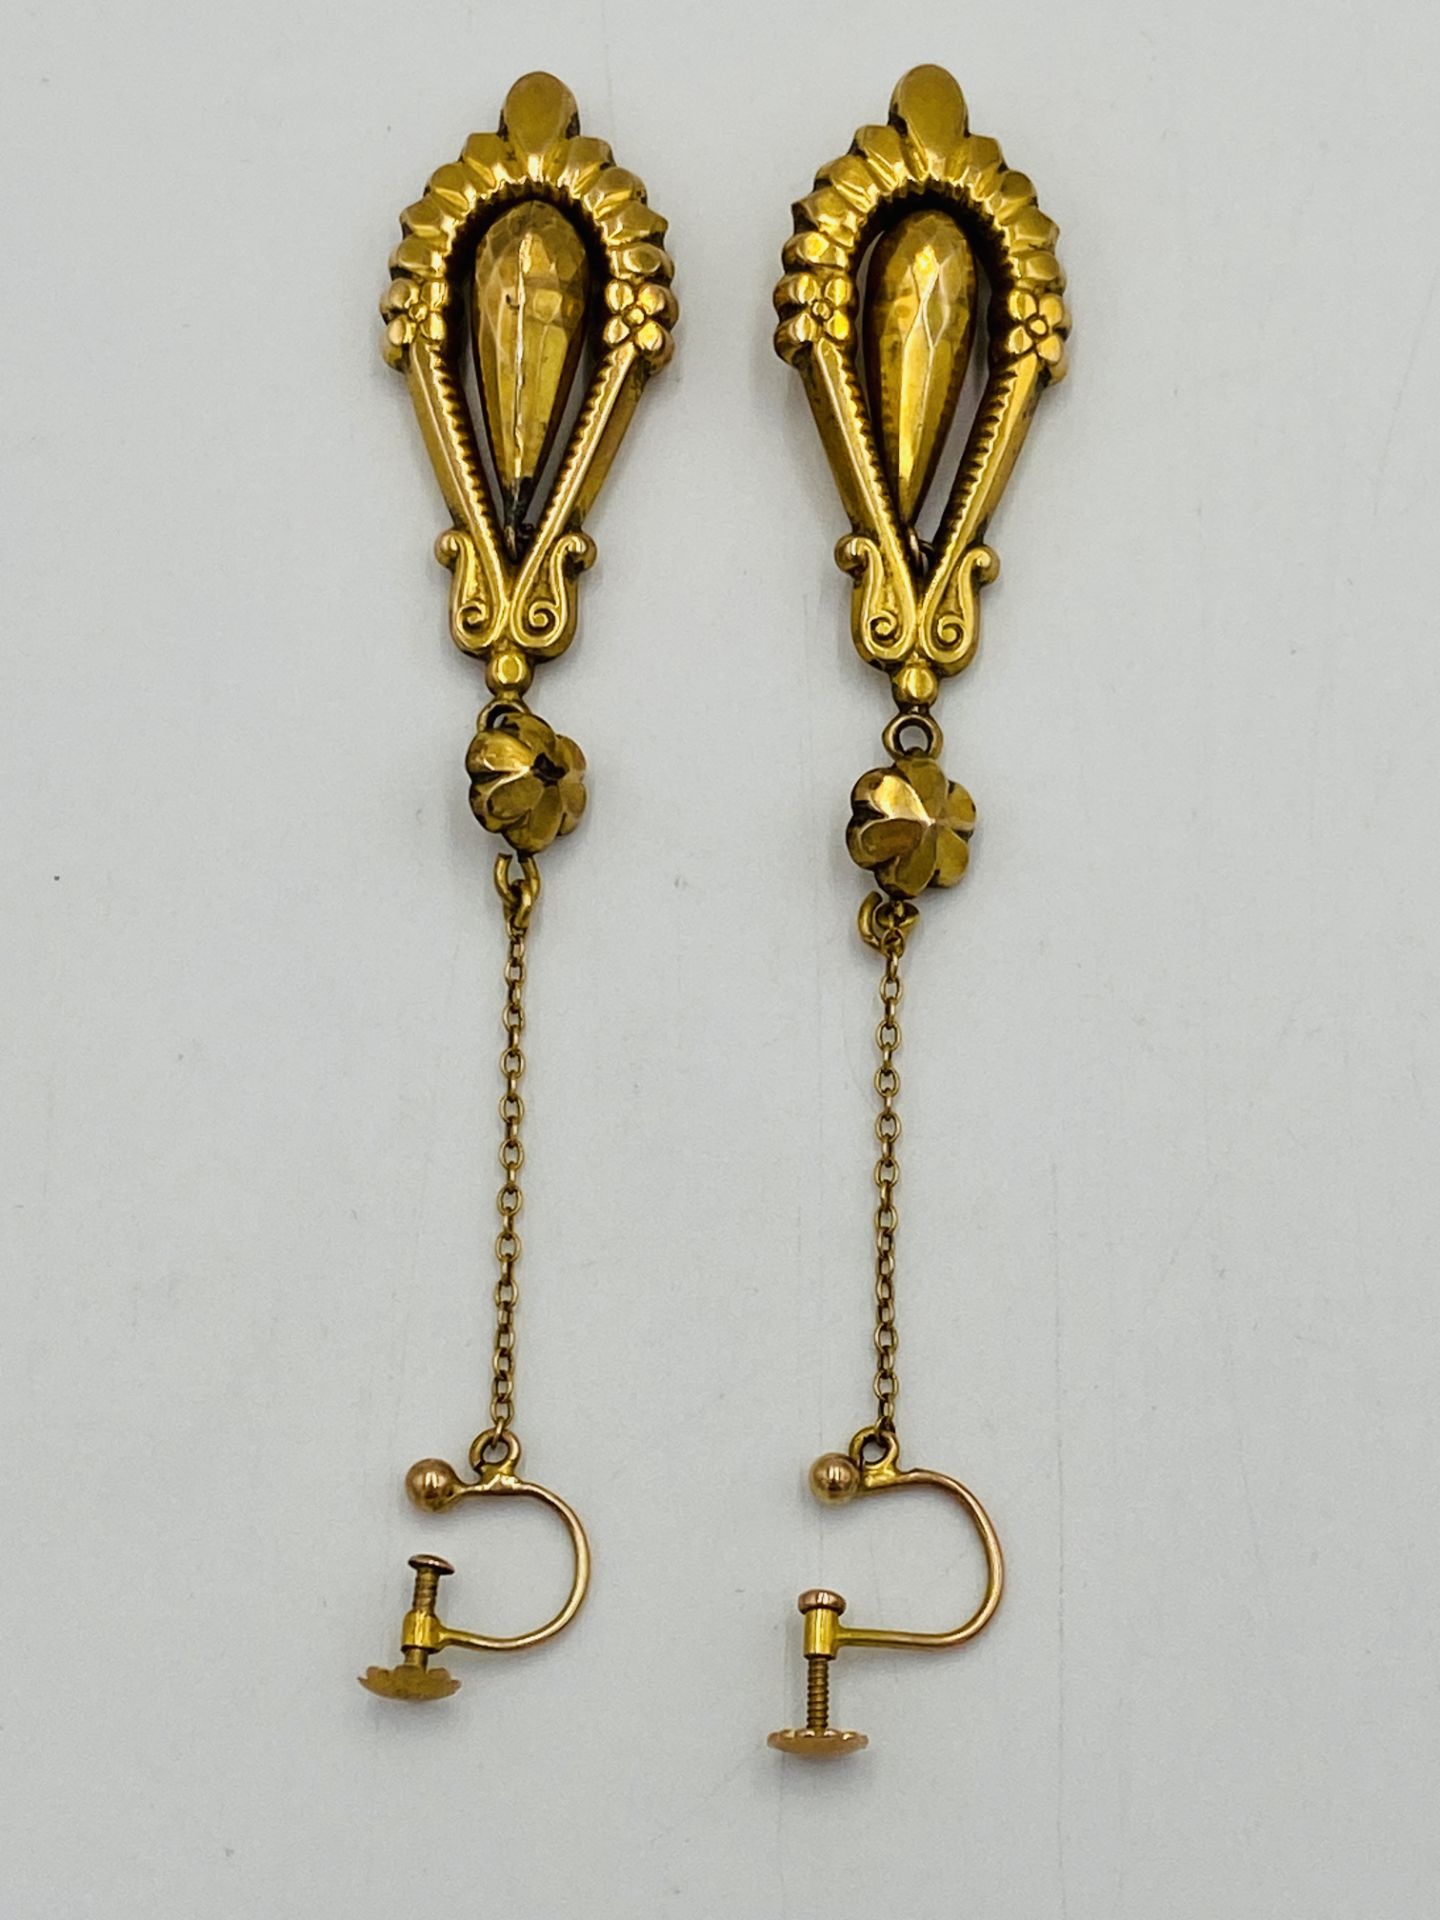 9ct gold drop earrings - Image 2 of 5